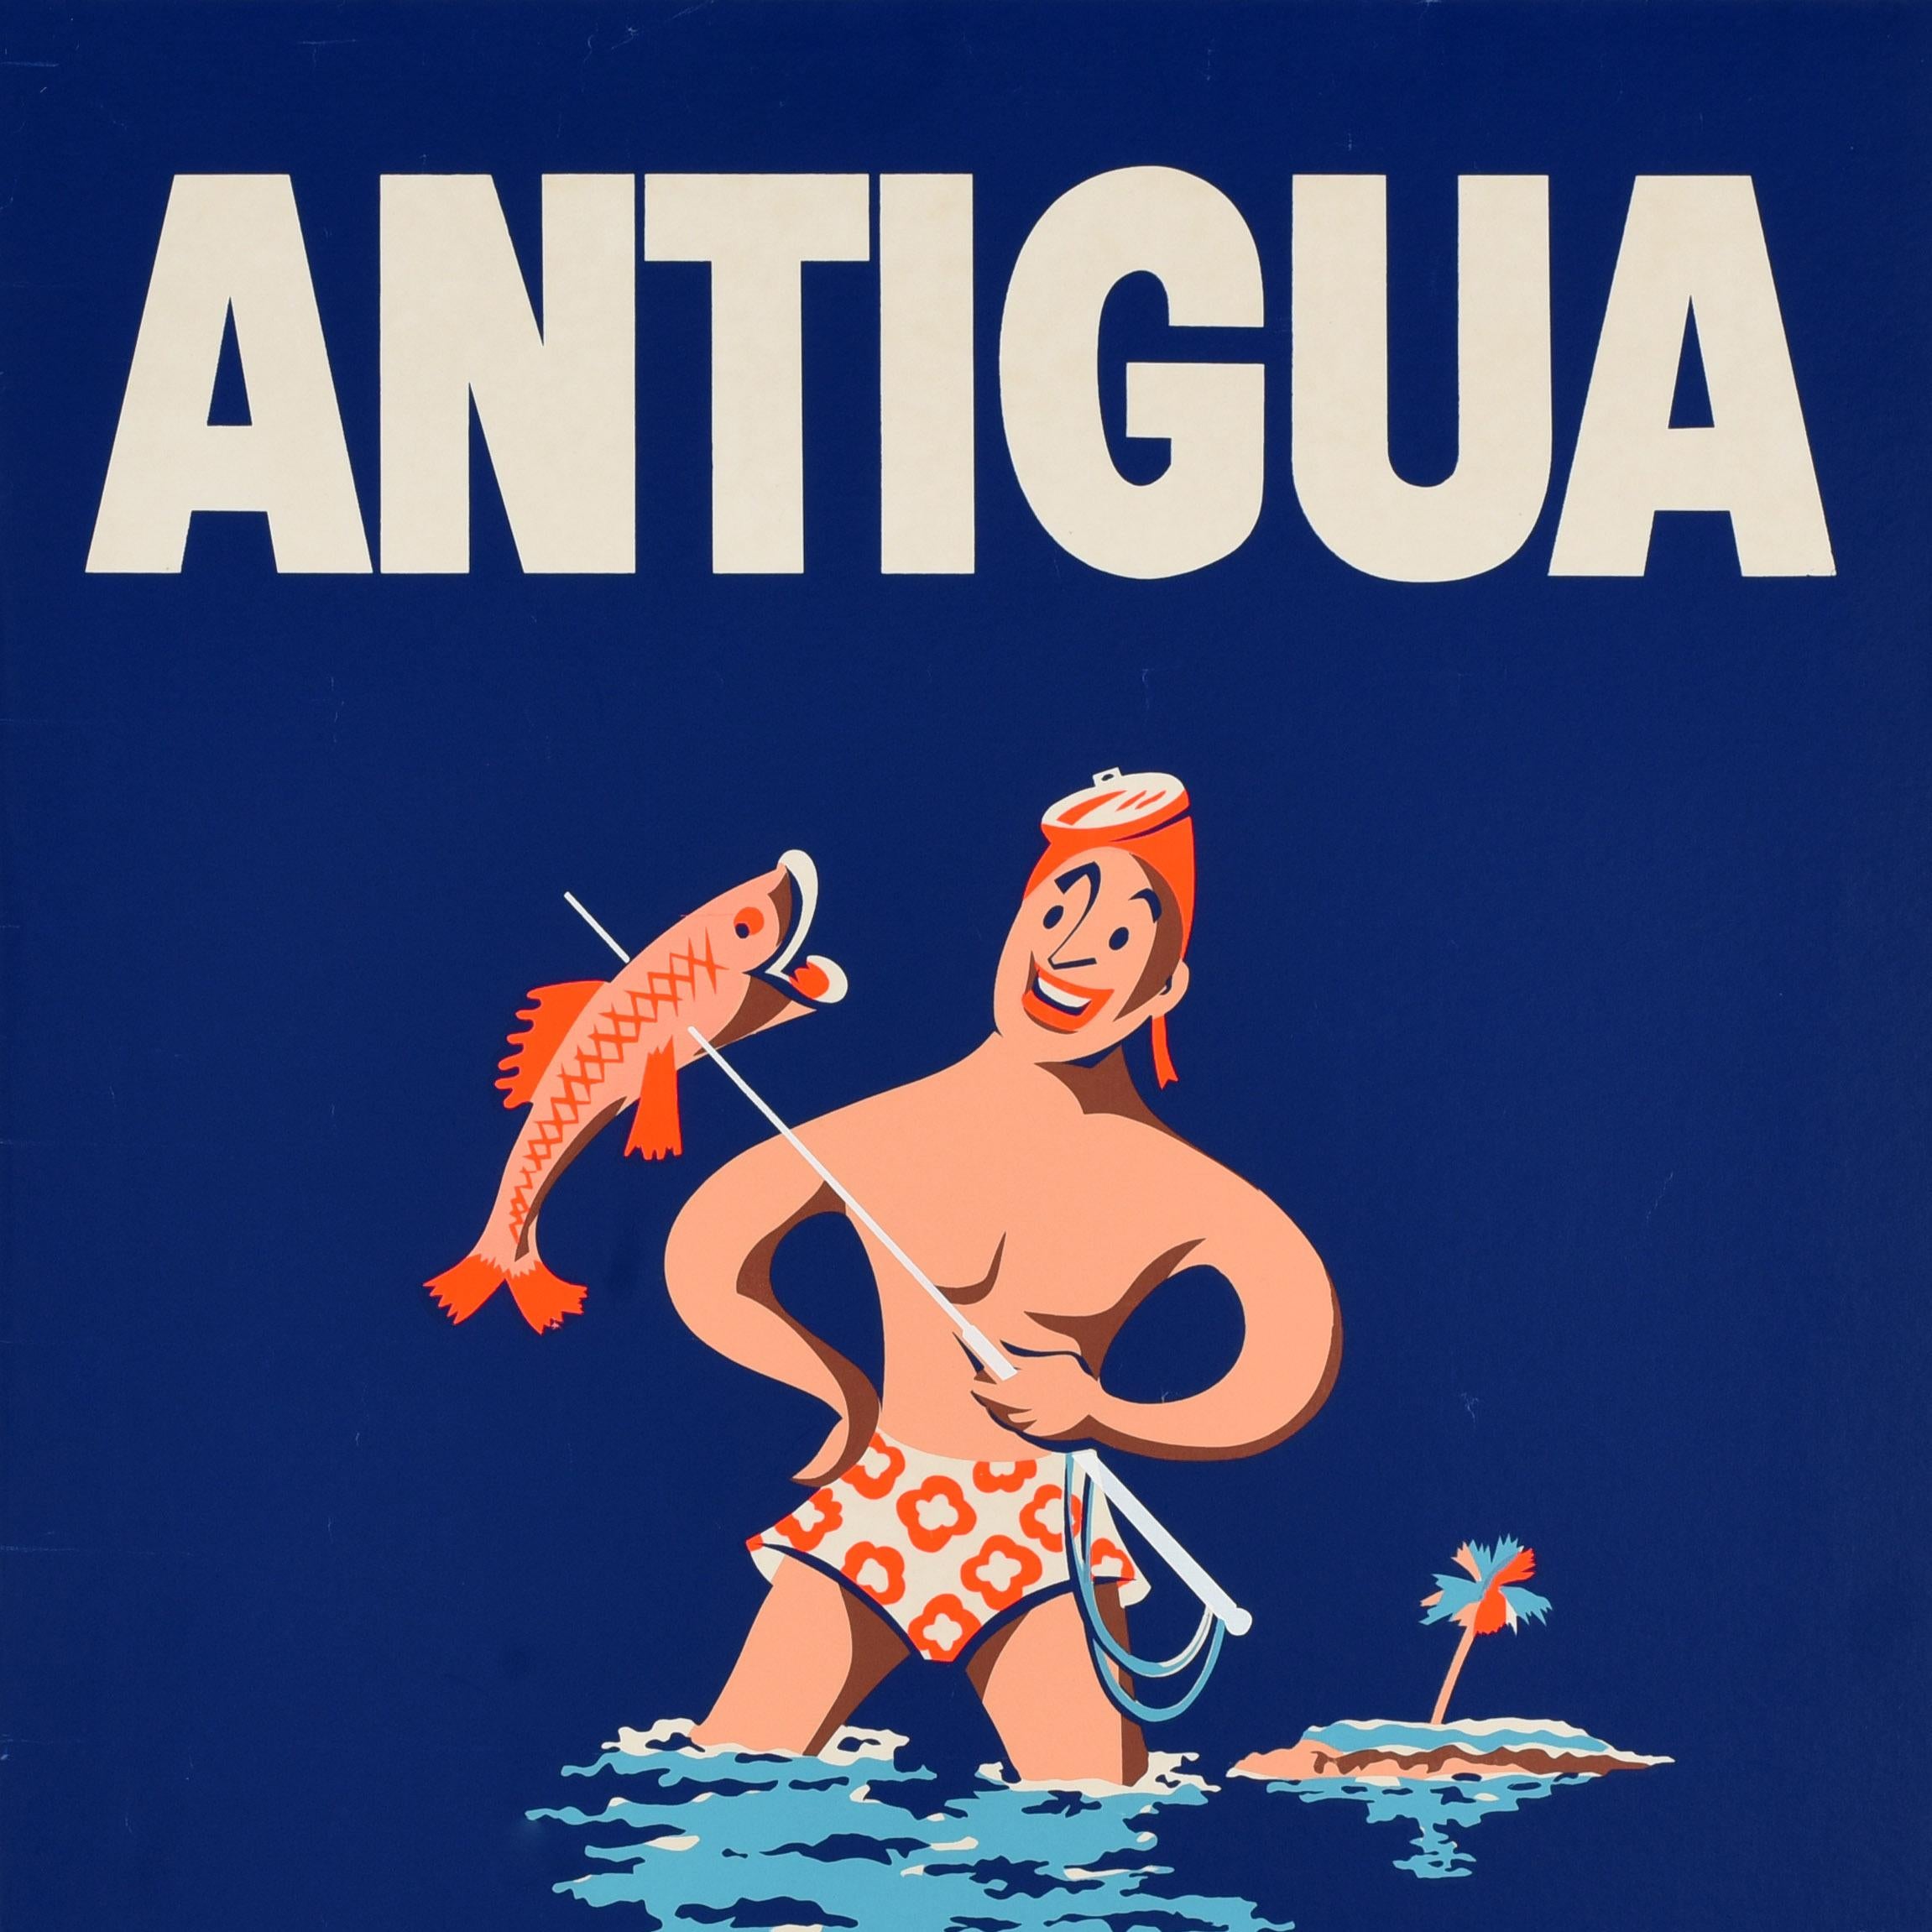 Original vintage travel poster - Antigua Sunjet your way on ... BWIA - featuring a fishing design depicting a smiling man wearing floral patterned swimming trunks and a mask on his head, holding a spear with a fish on it in front of a palm tree on